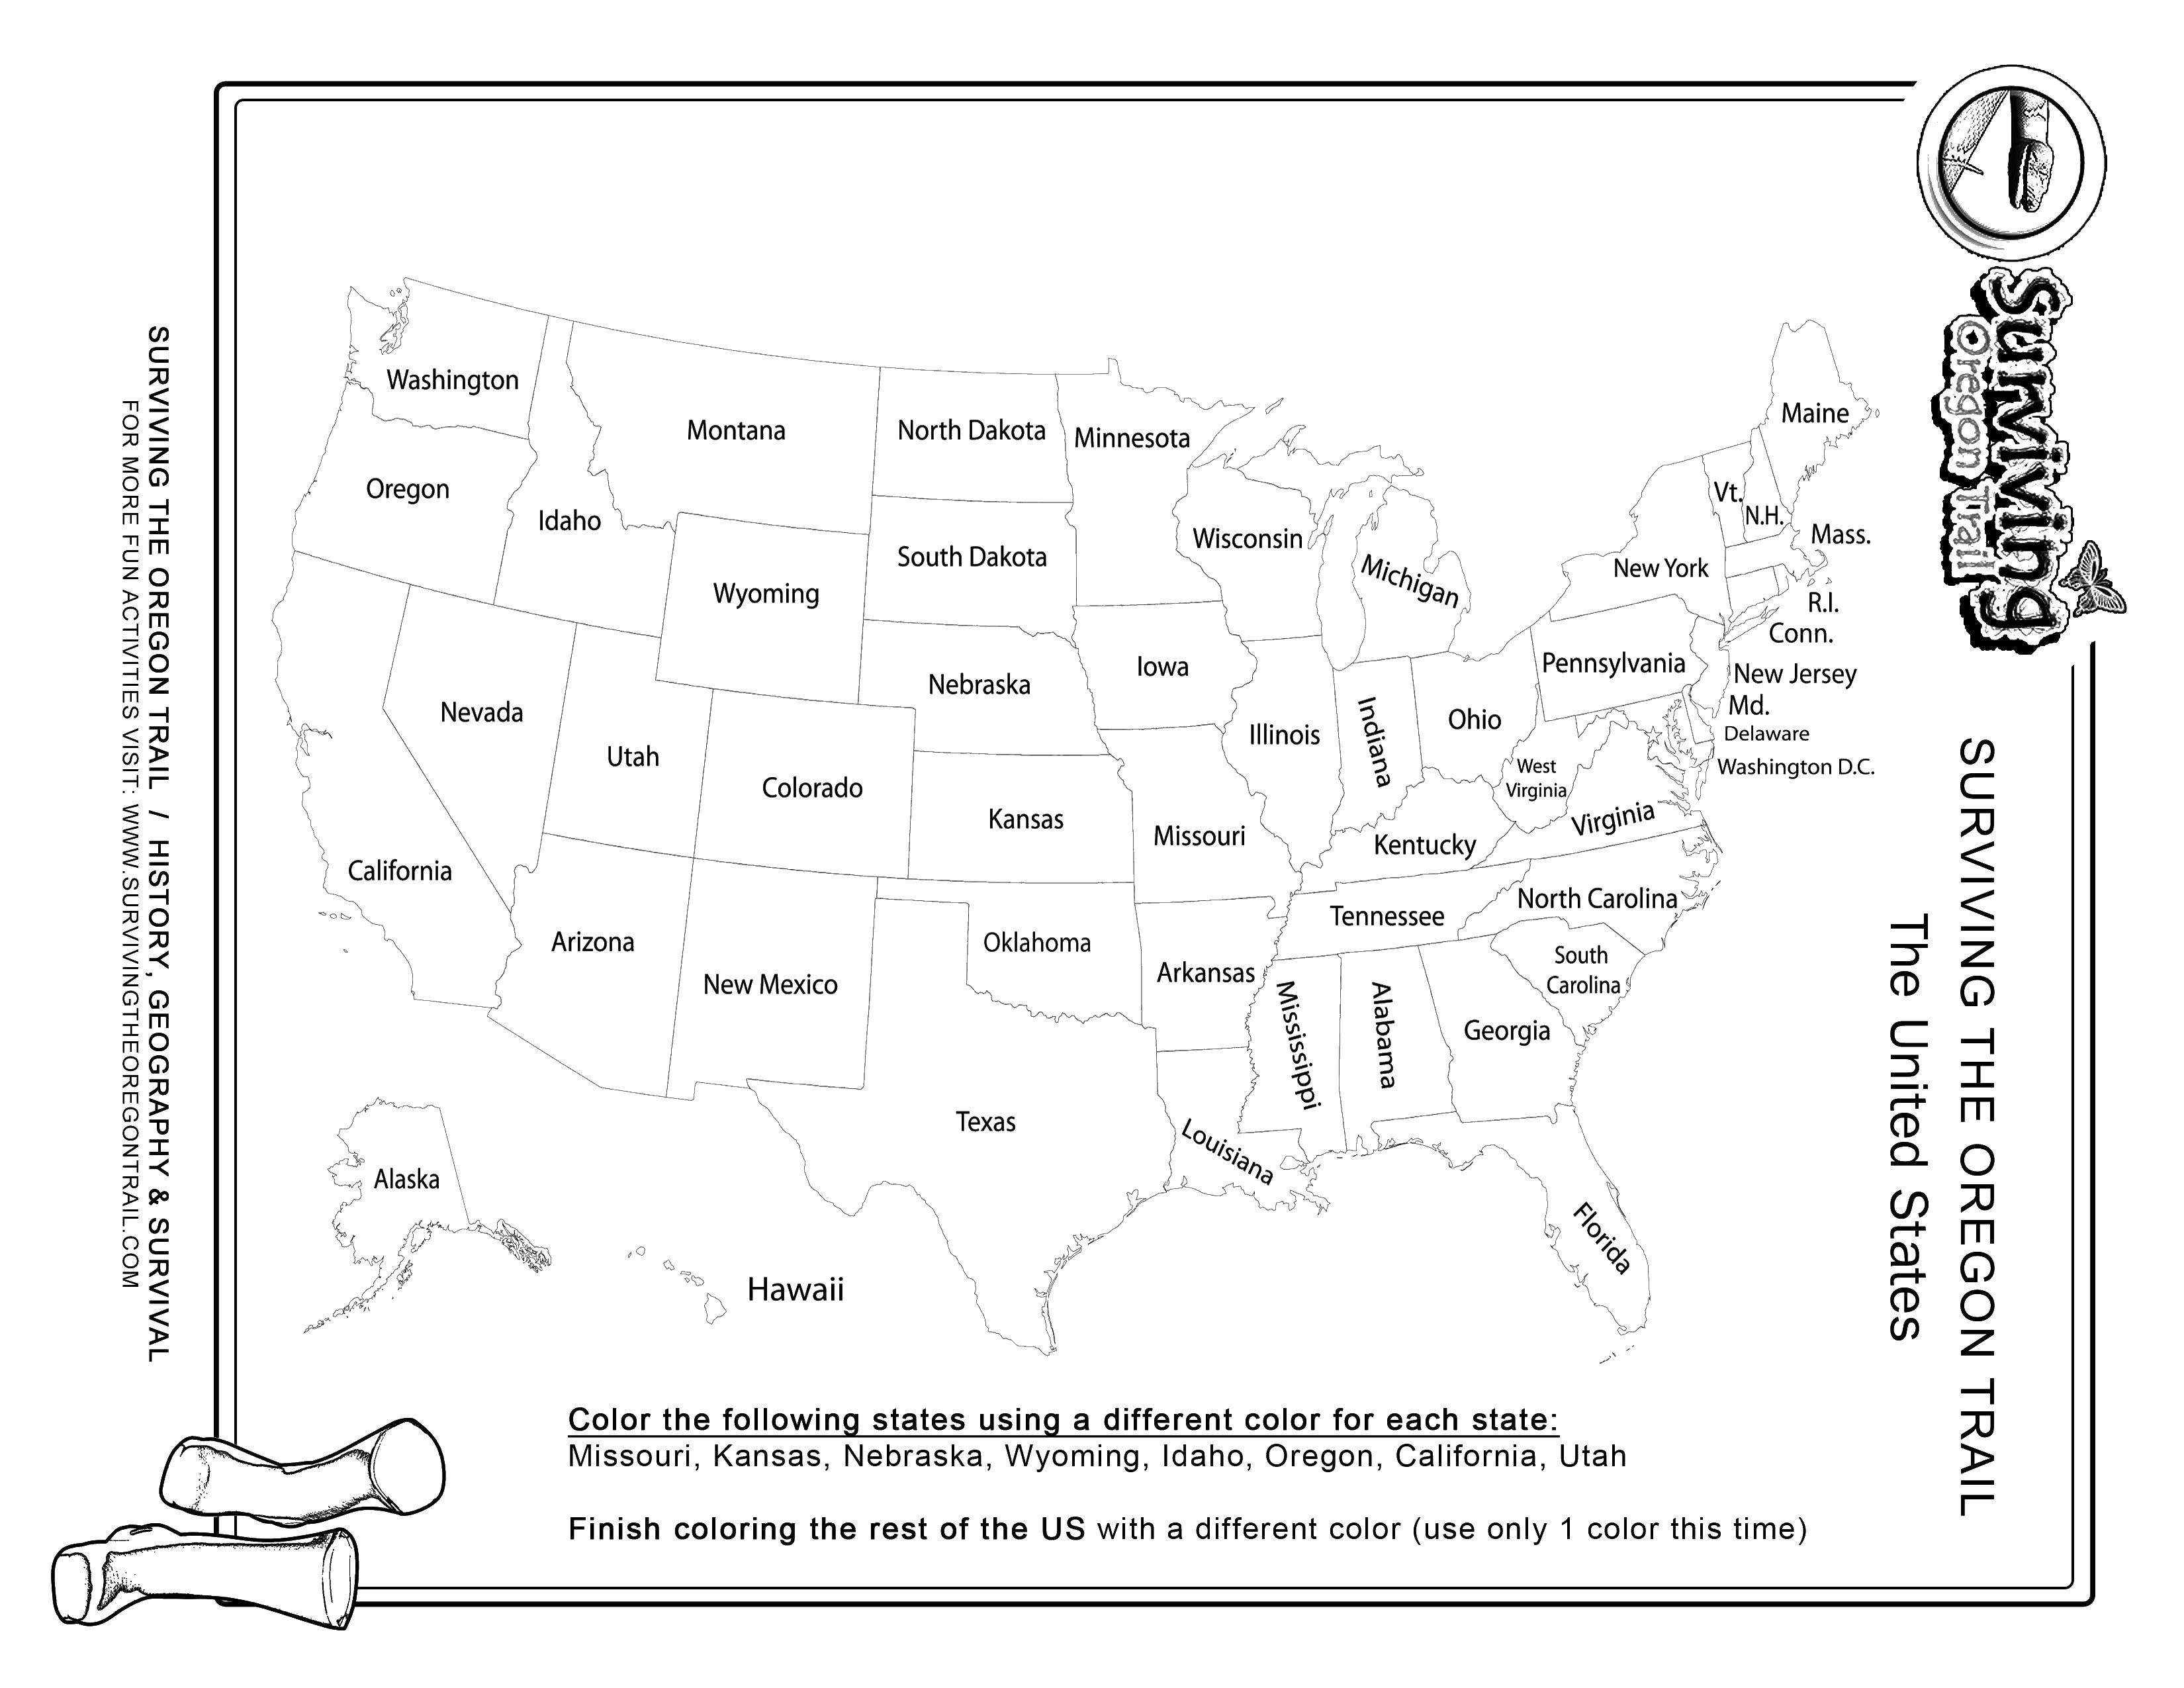 Coloring Map of the United States of America. Category USA . Tags:  state, USA, America, border, card.